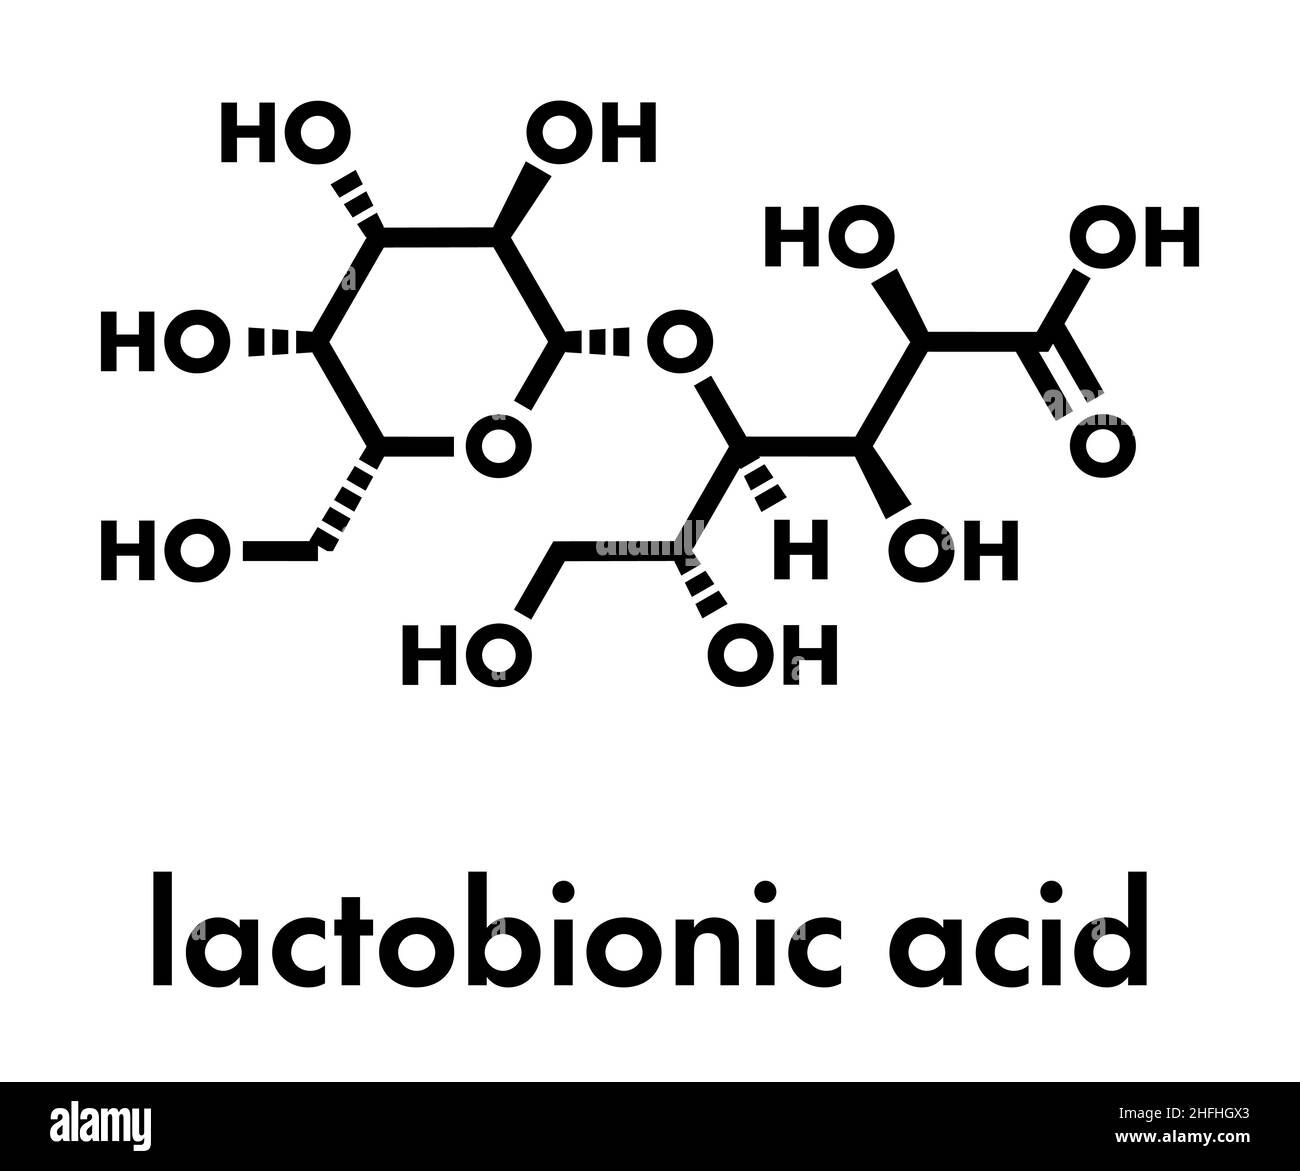 Lactobionic acid (lactobionate) molecule. Commonly used additive in food products, medicinal products and cosmetics. Skeletal formula. Stock Vector